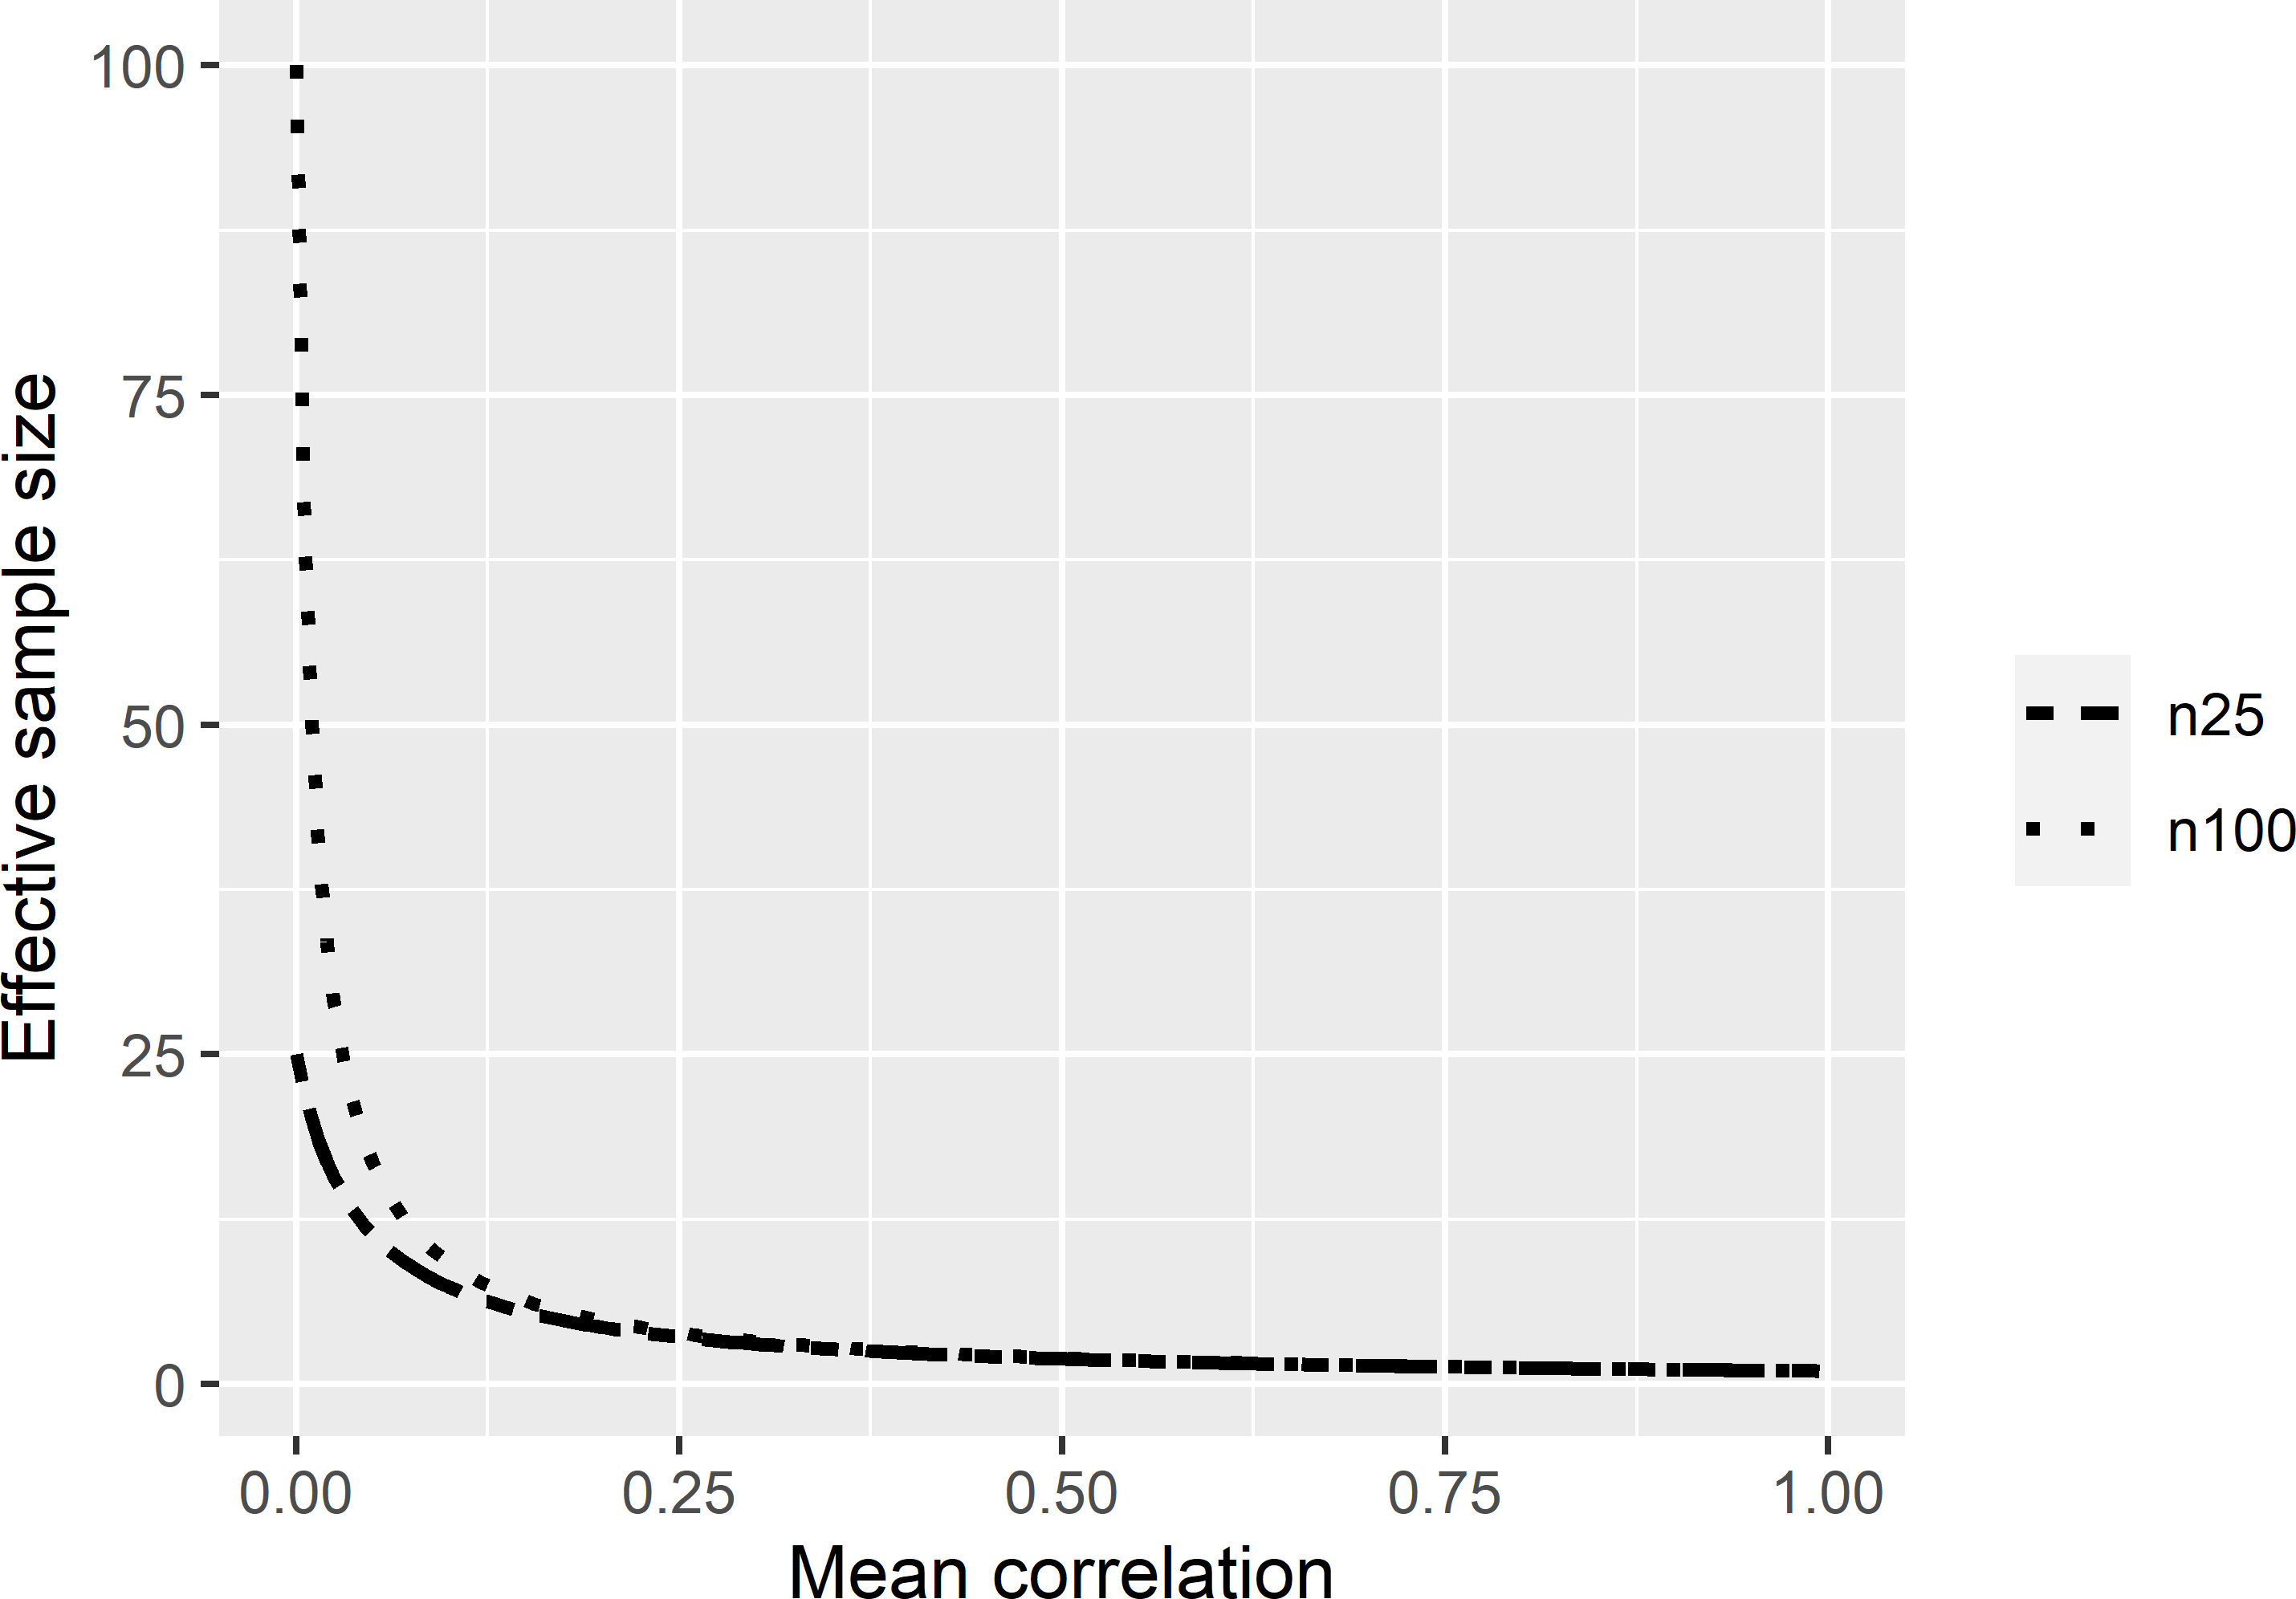 Effective sample sizes as a function of the mean correlation within the sample, for samples of size 25 and 100.